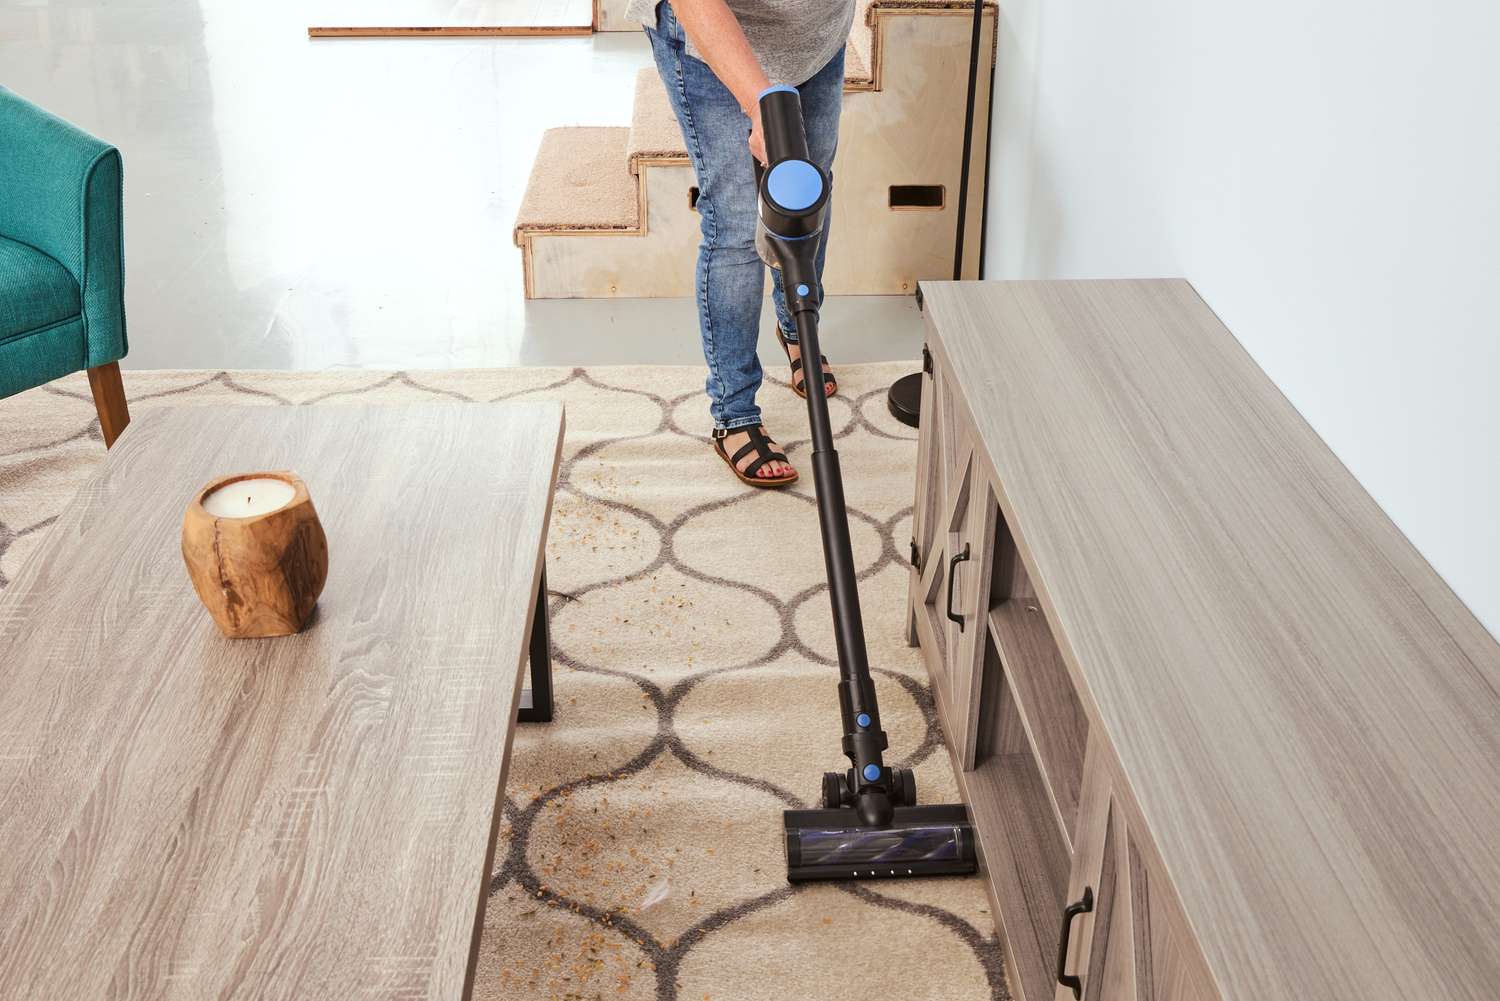 A person uses the WOWGO Cordless Vacuum Cleaner to clean a rug around furniture.